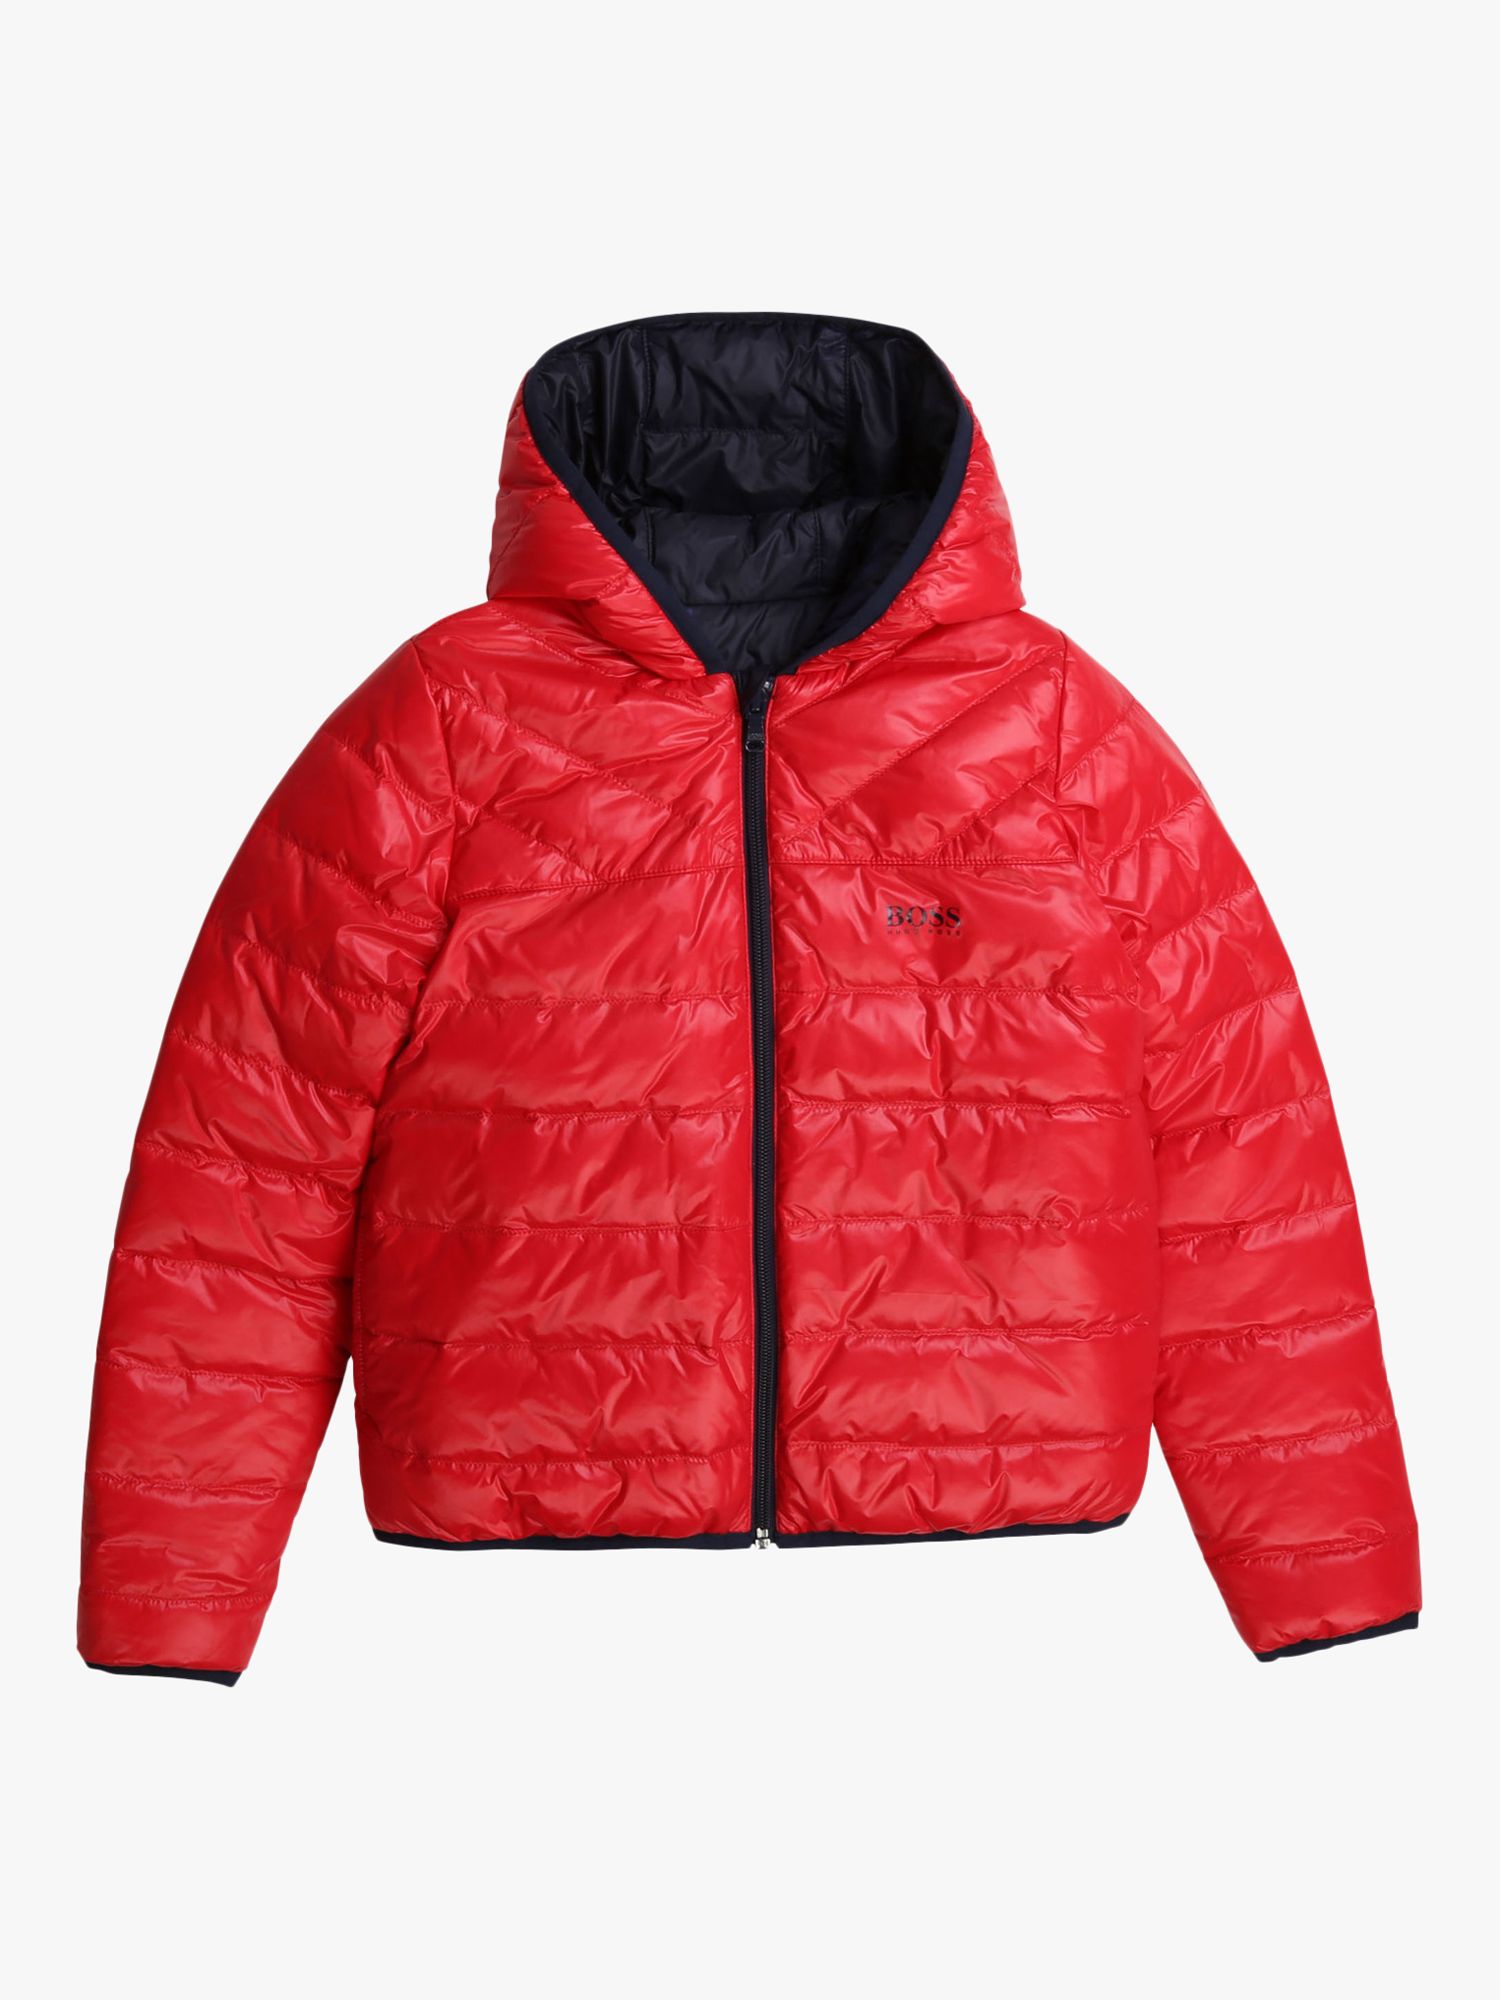 boss red jacket